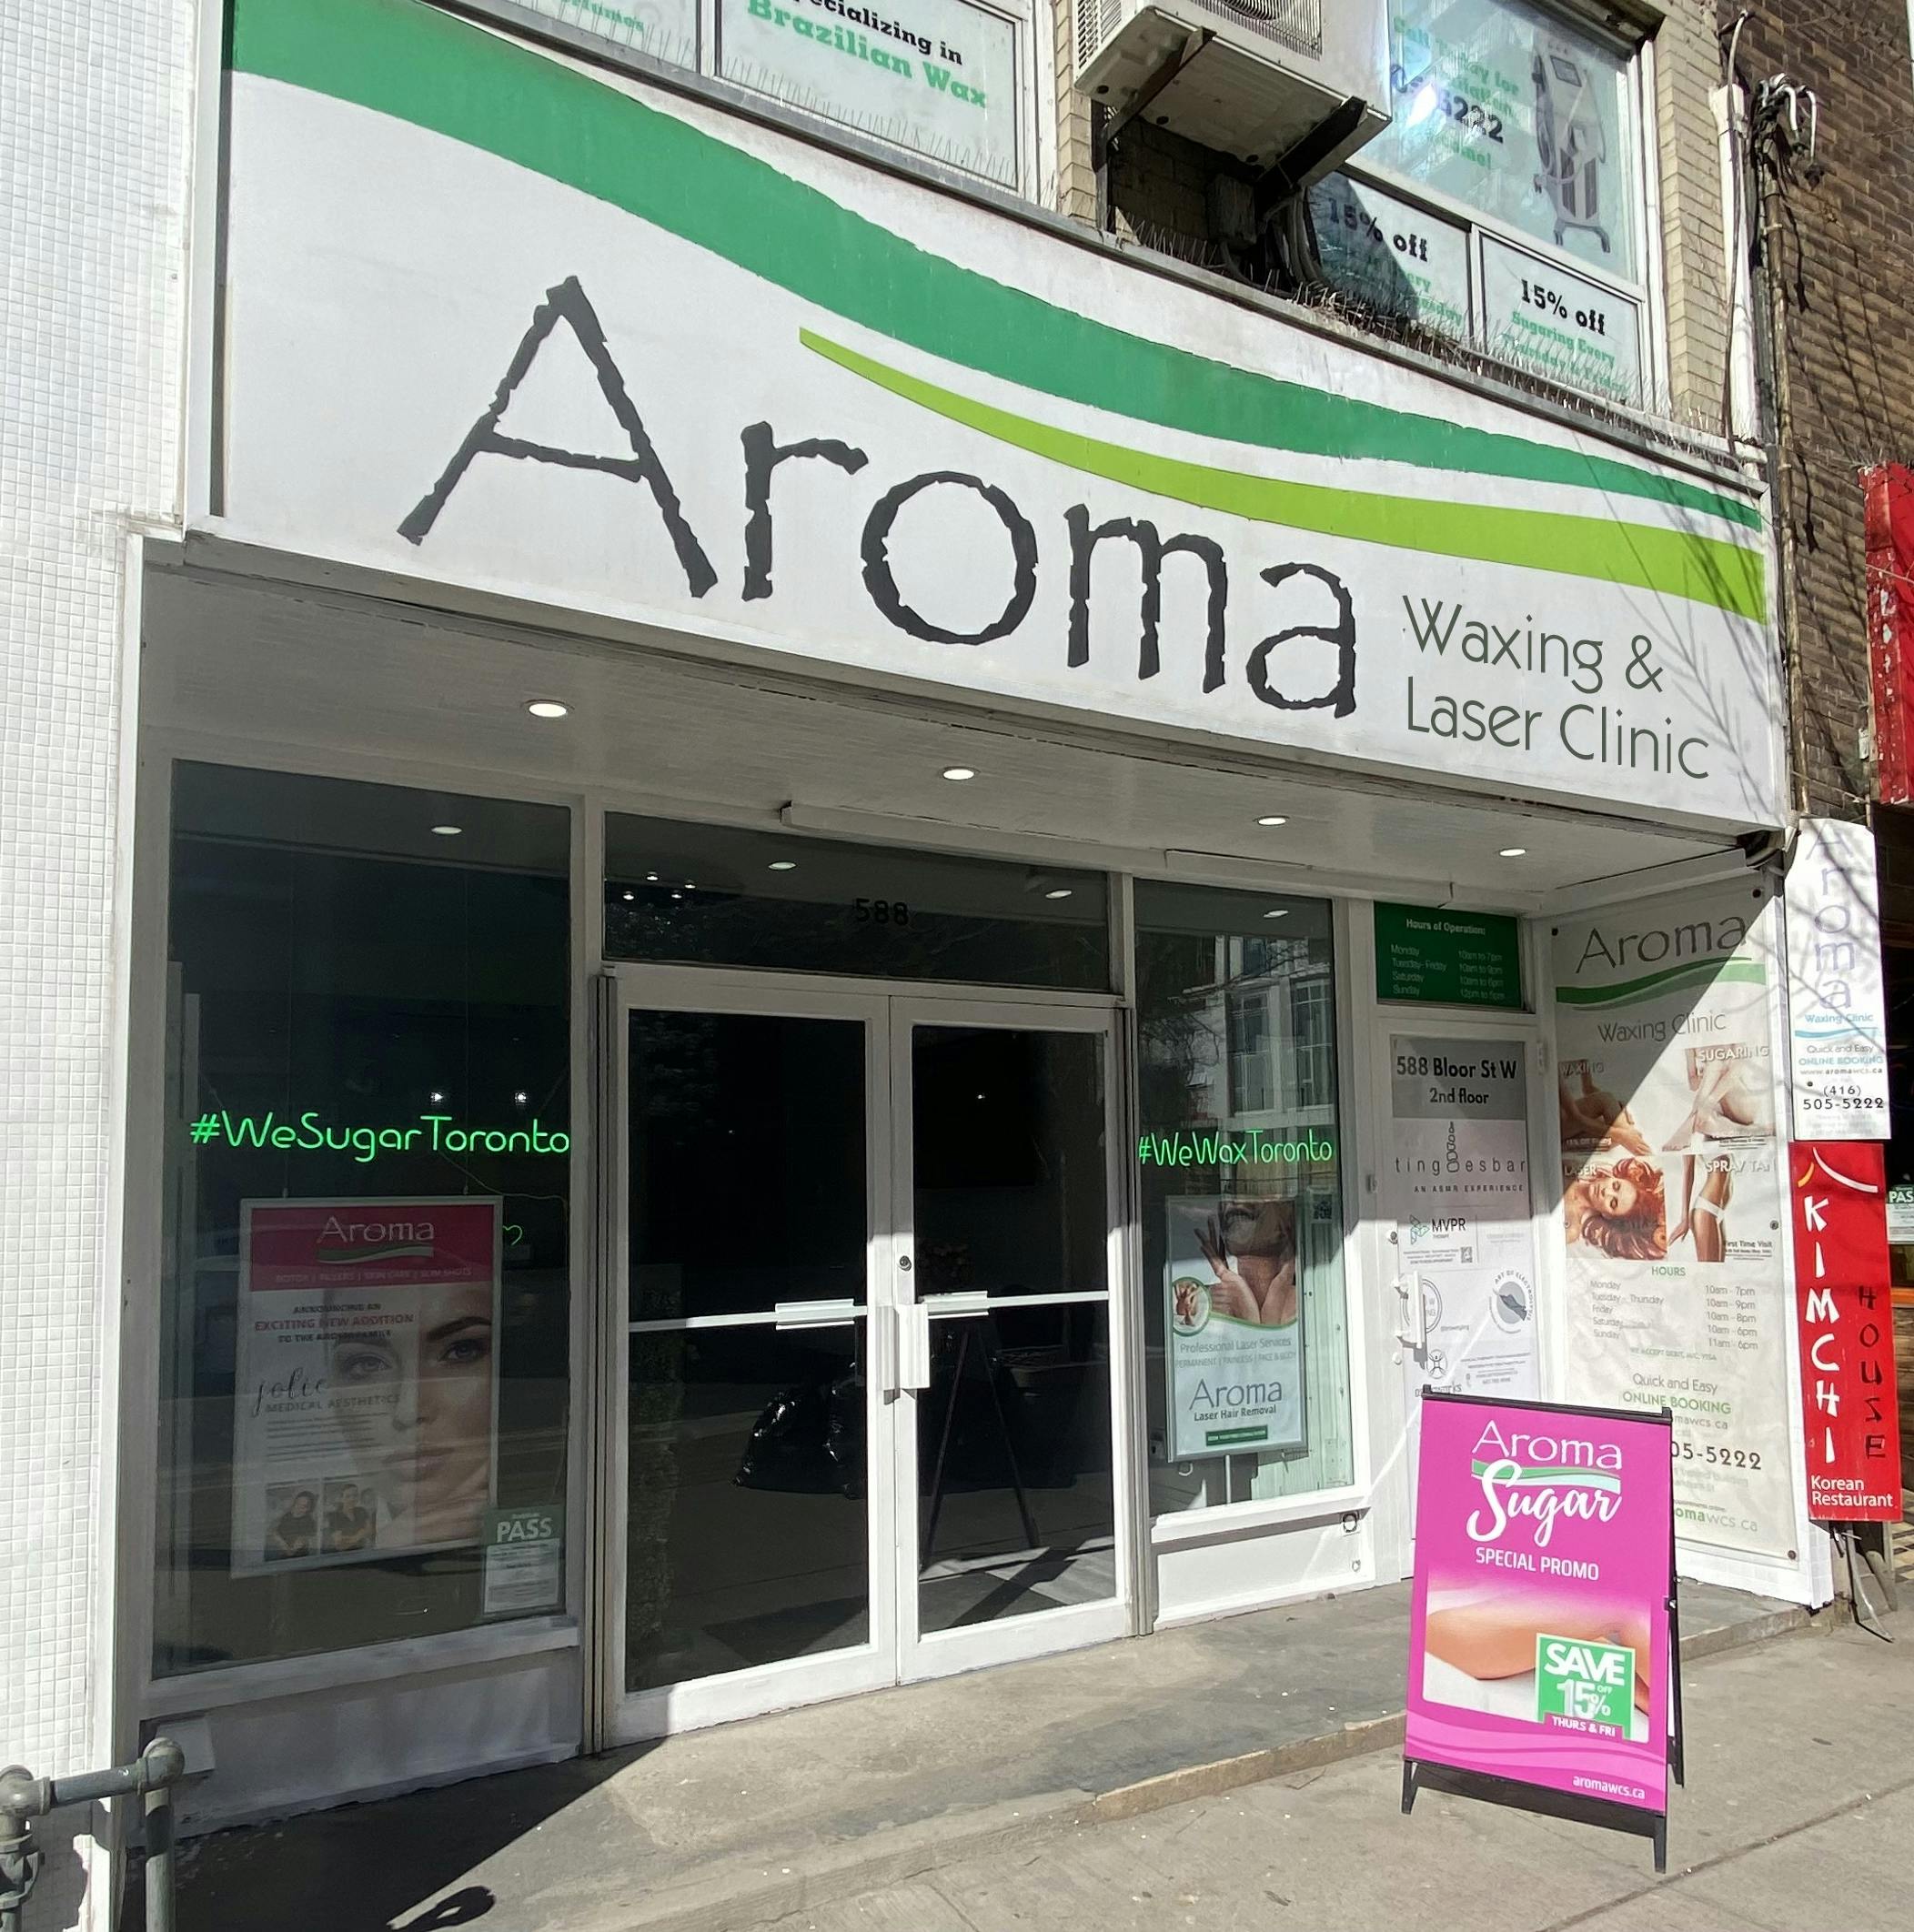 The storefront of Aroma Waxing and Laser Clinic (Bloor Street West location) with hours of operation, address.